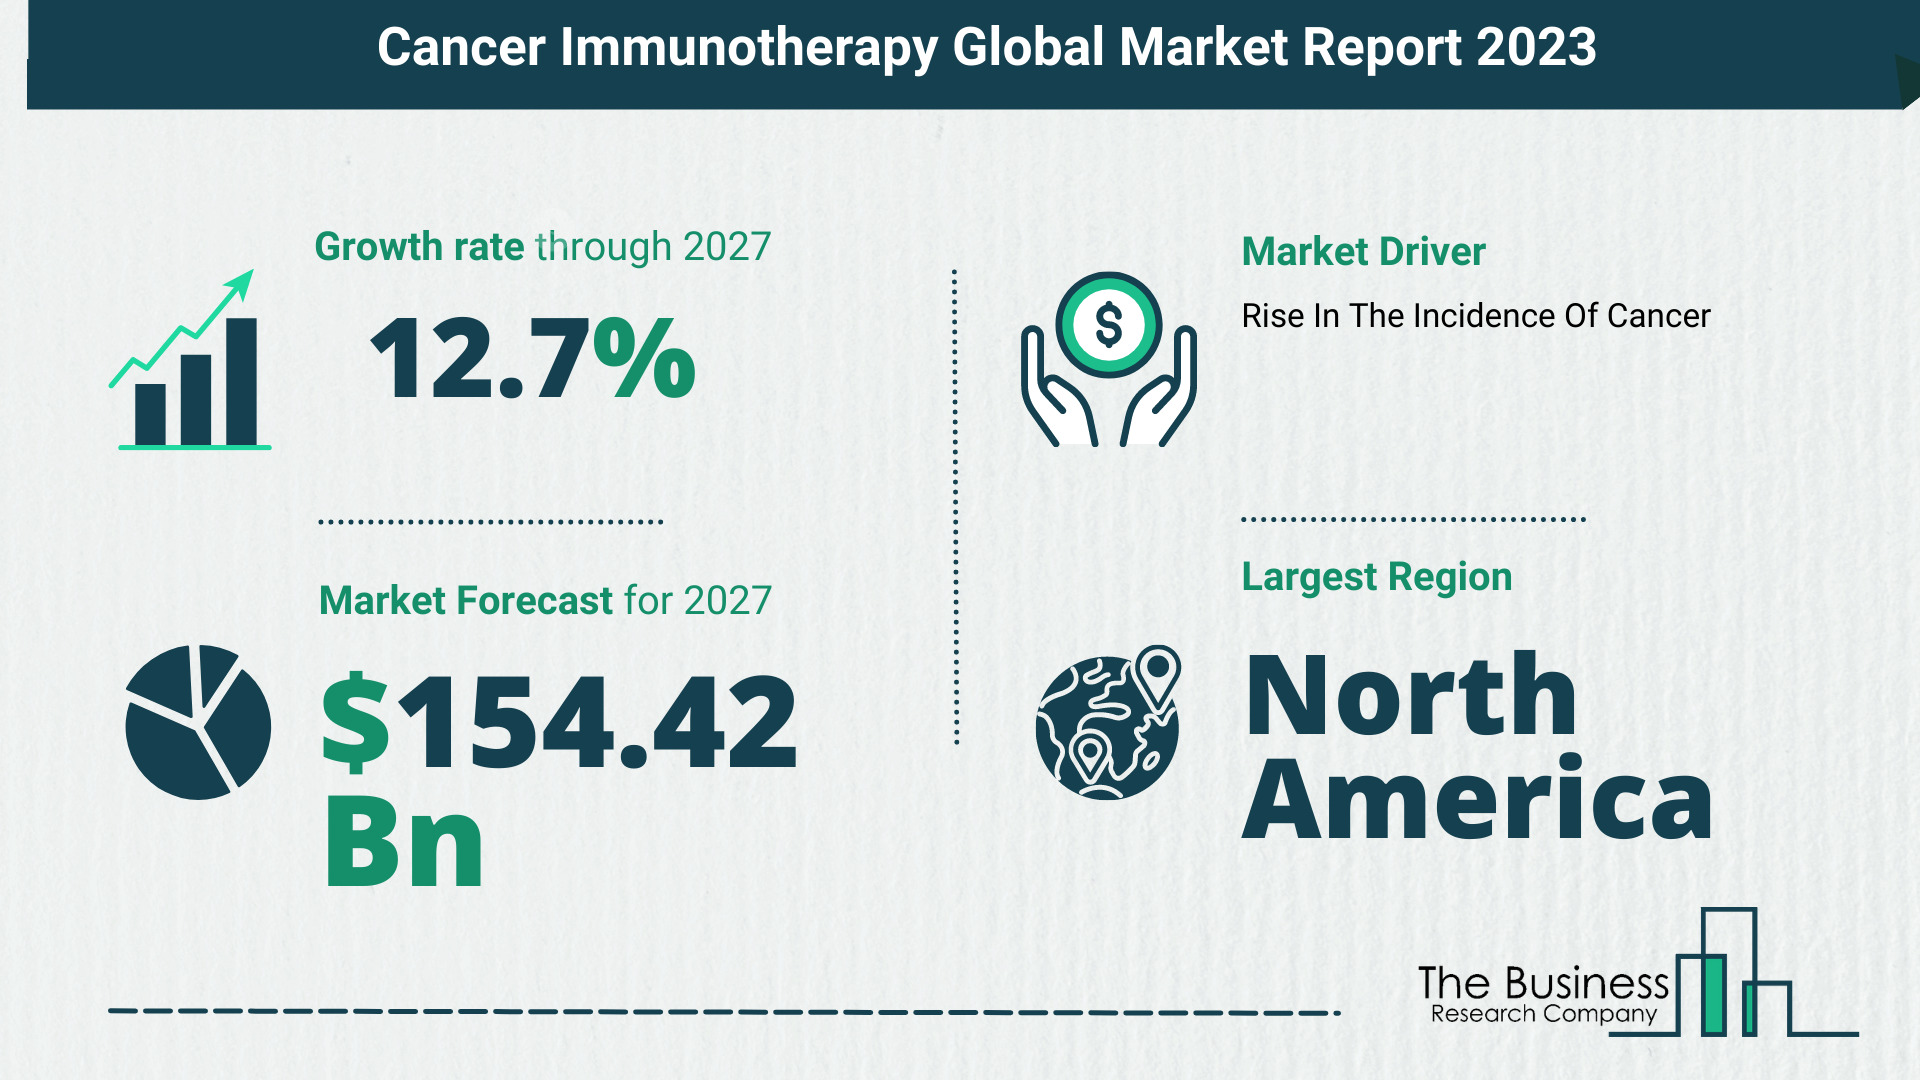 Global Cancer Immunotherapy Market Report 2023 – Top Market Trends And Opportunities